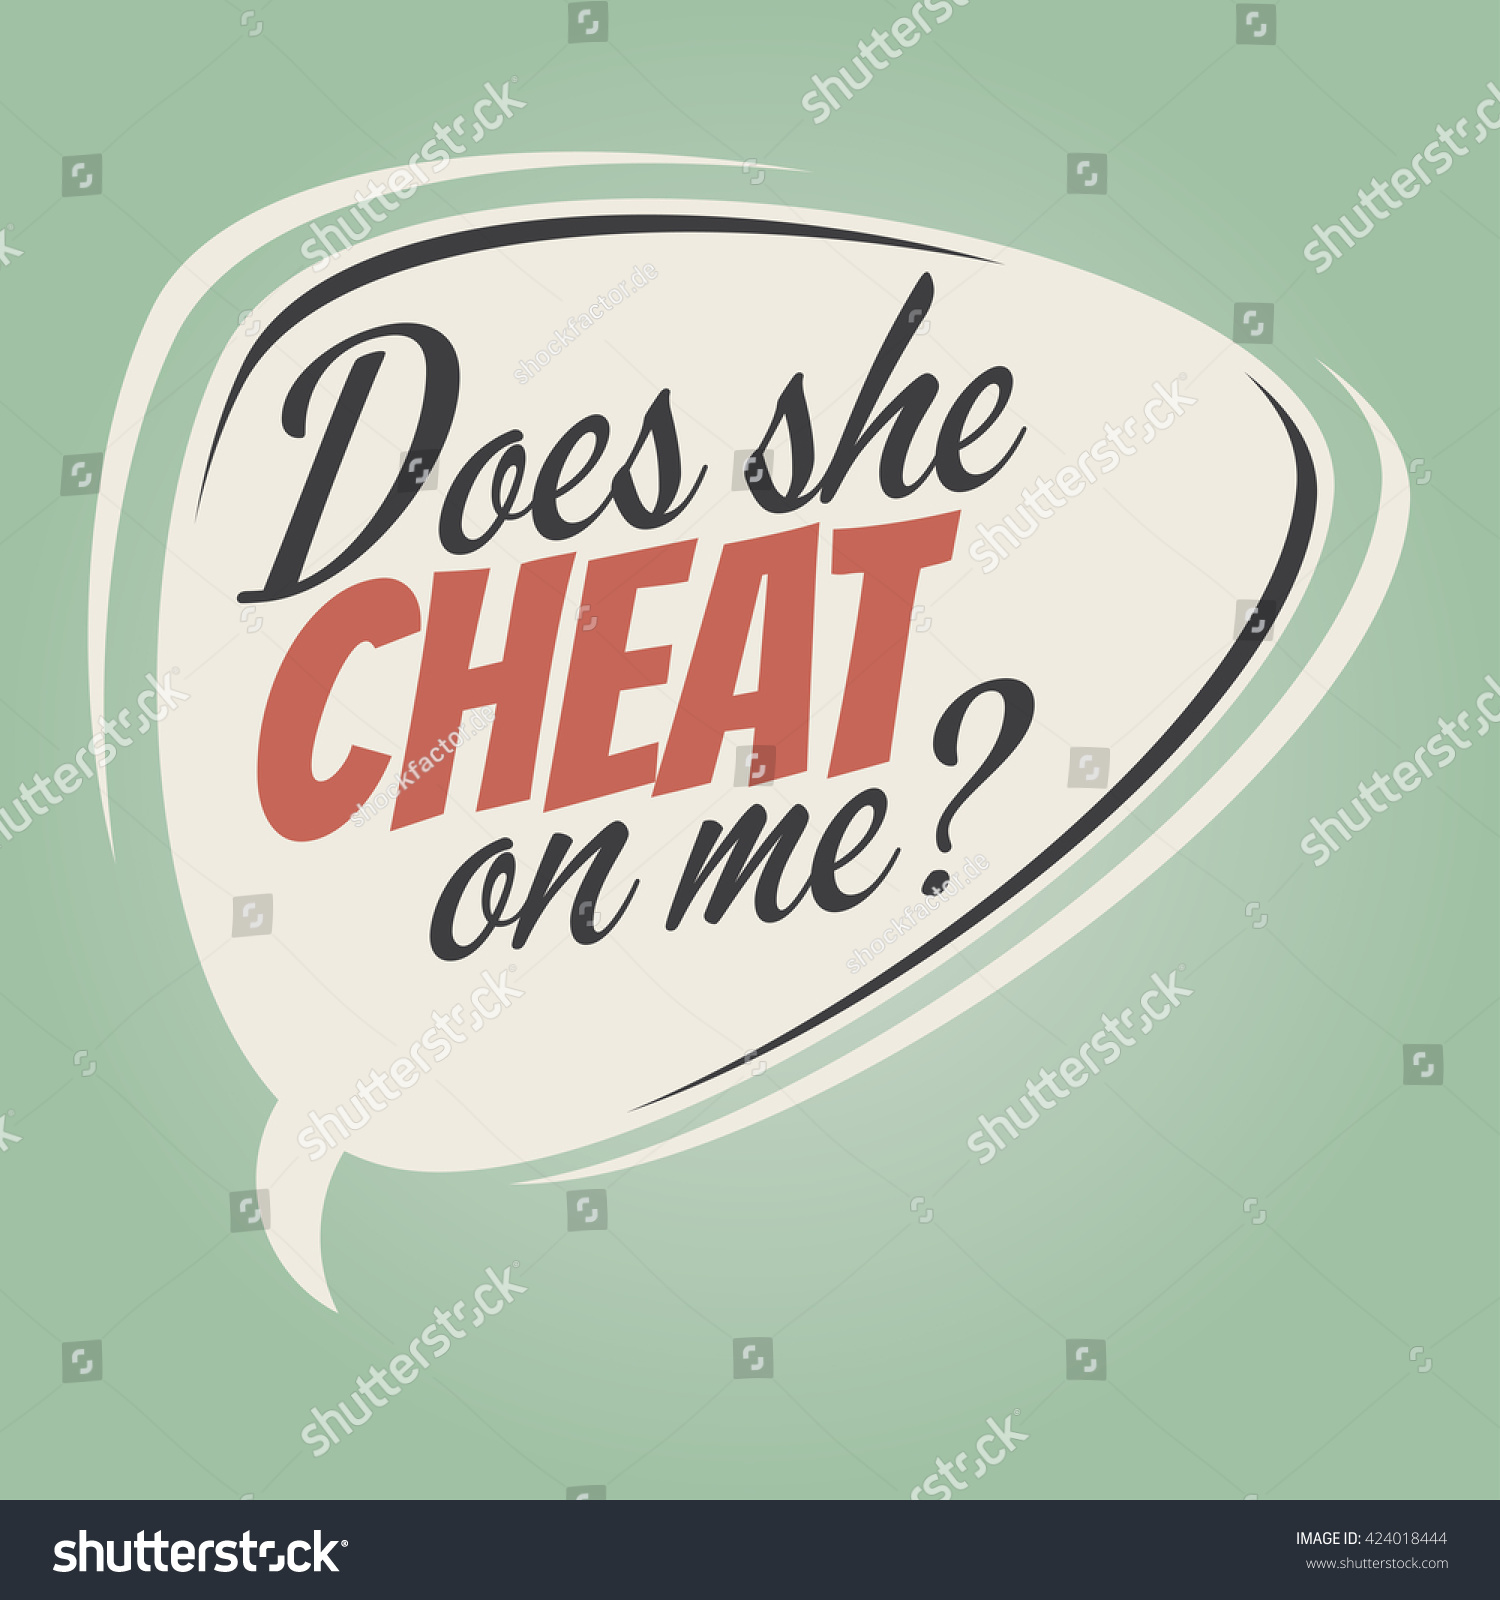 She cheat does why Why does